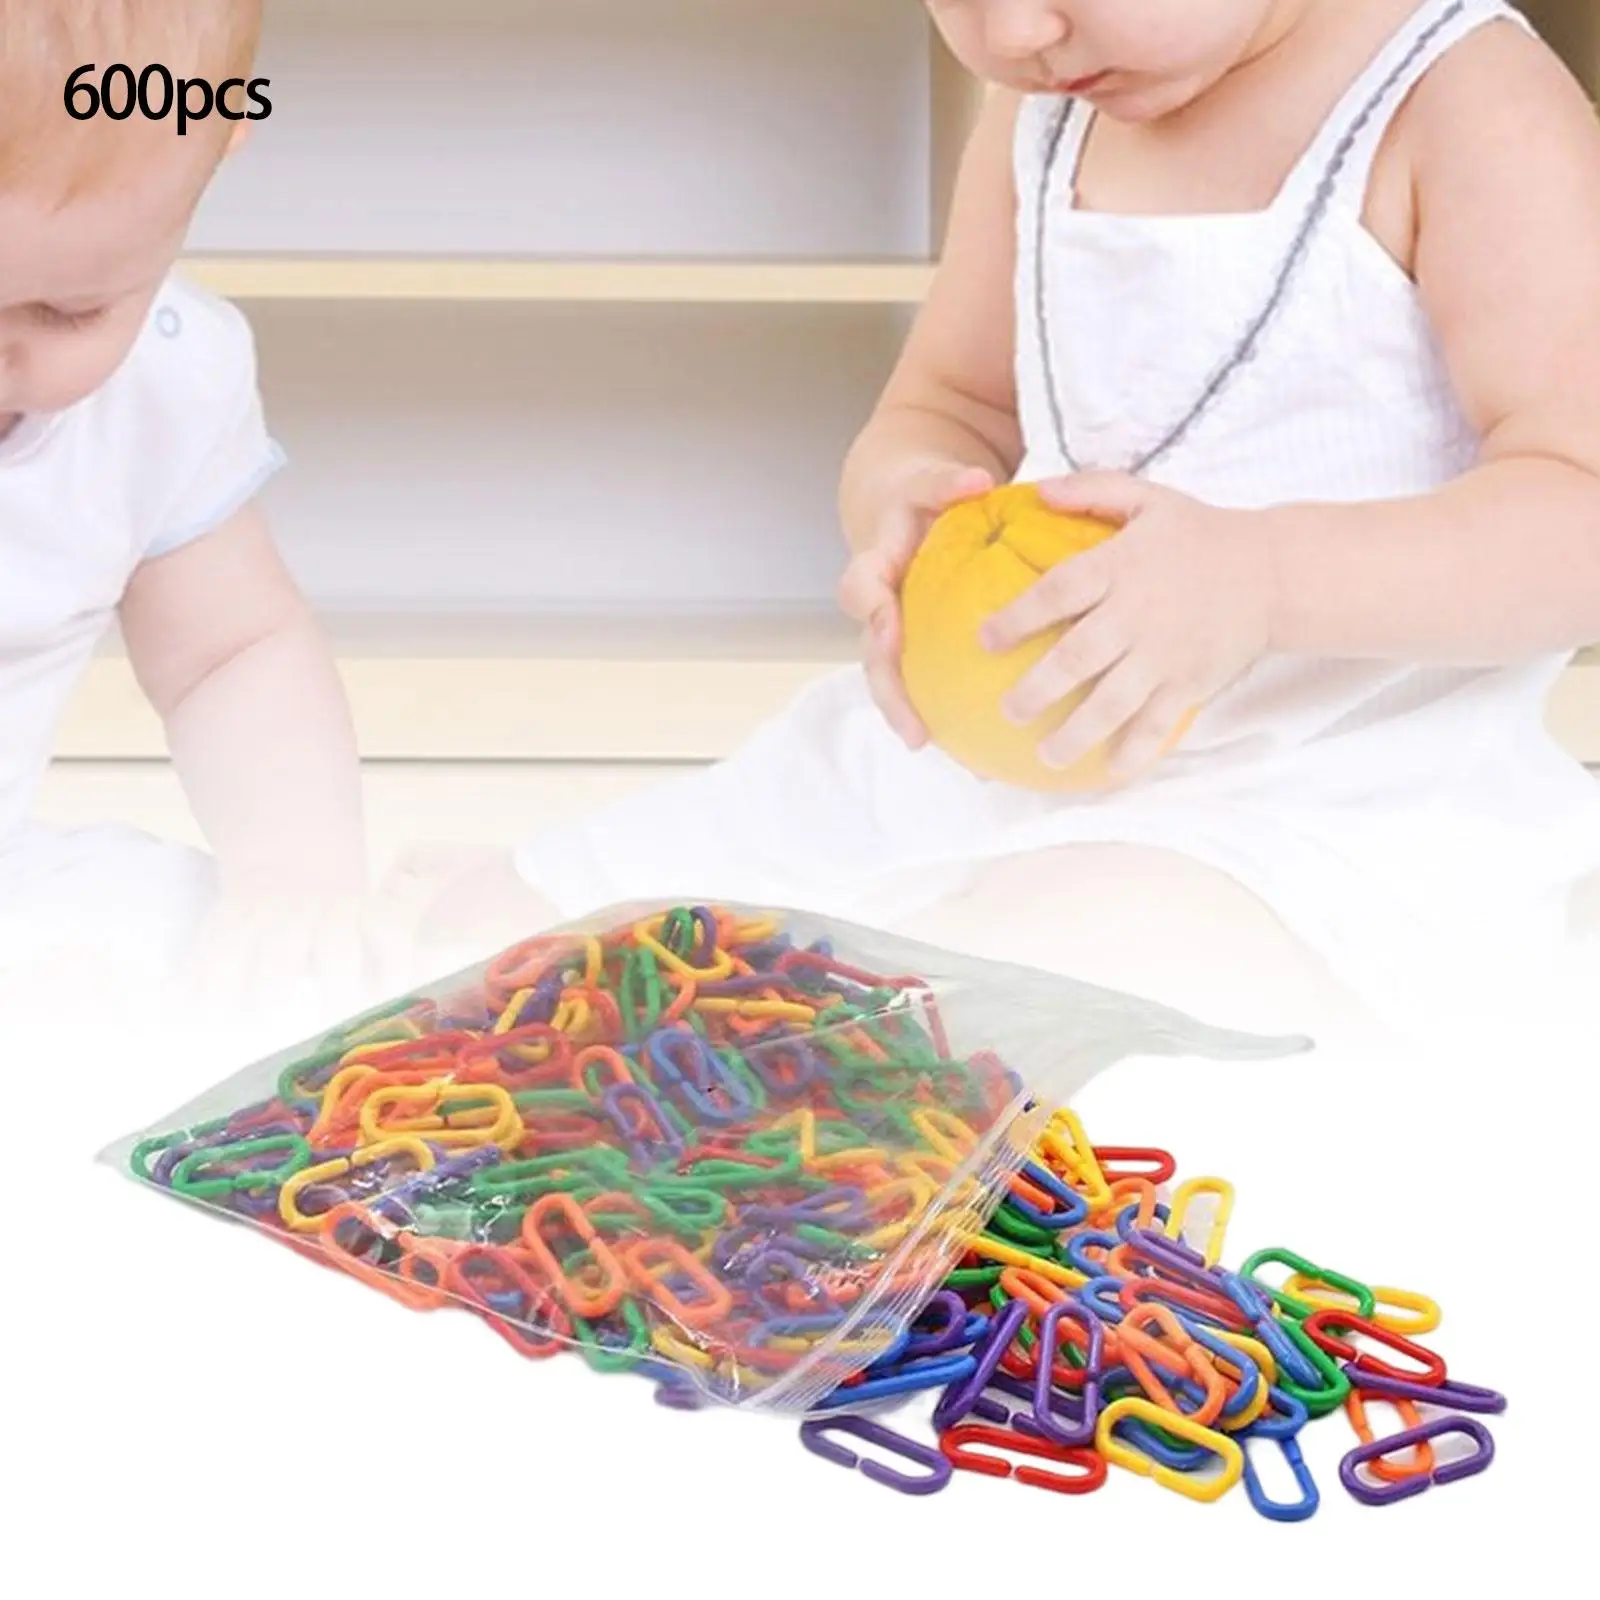 600Pcs Hooks Chain Links Learning Toys Counting and Sorting for Sugar Glider